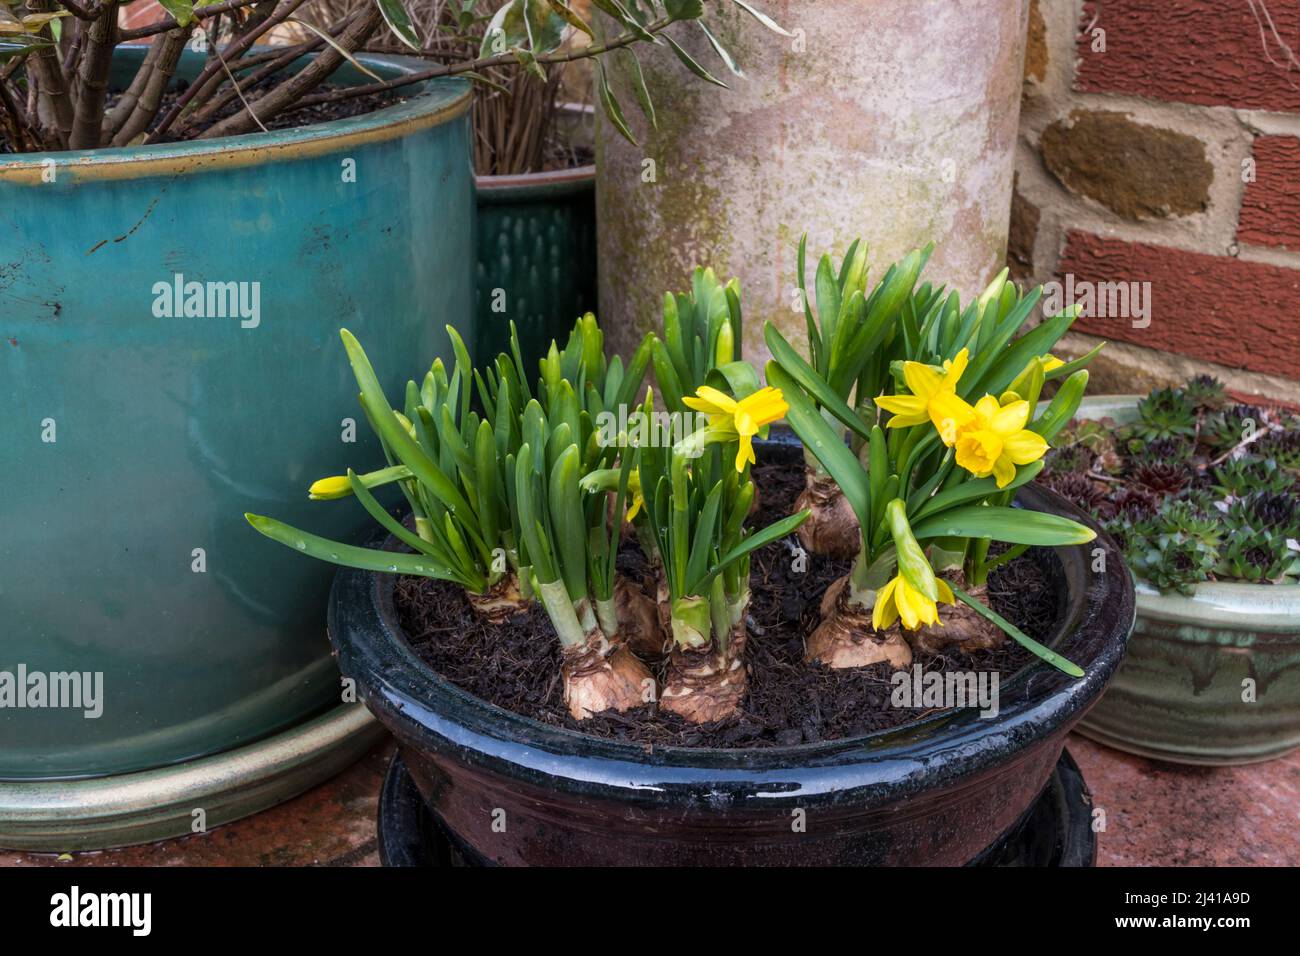 A shallow pot planted with Tete a Tete Narcissus, miniature daffodil bulbs. Stock Photo